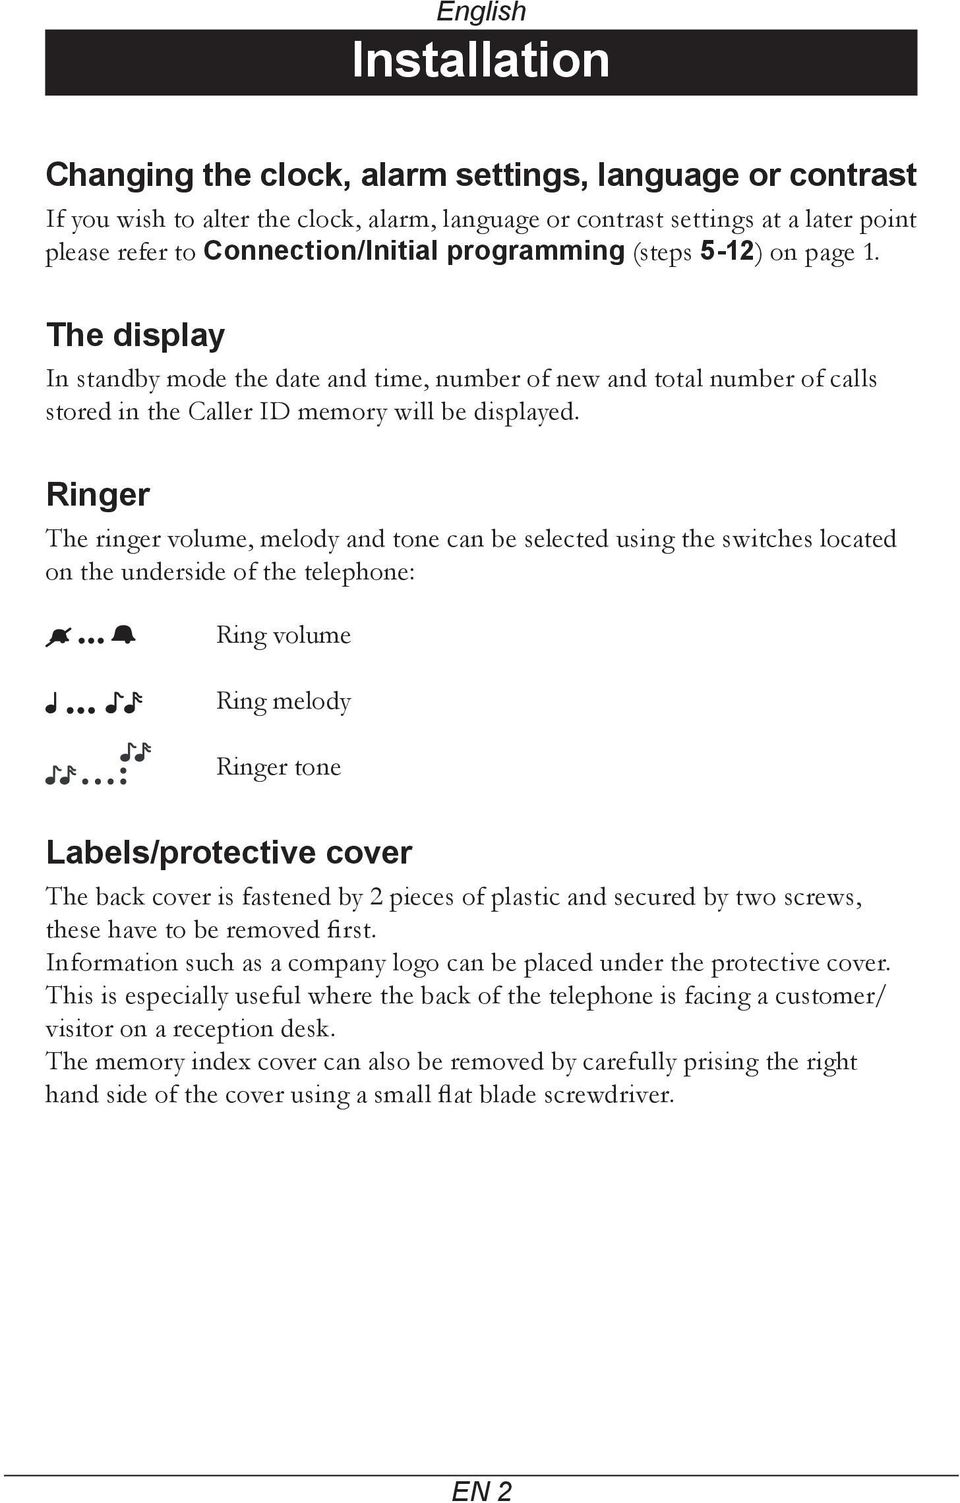 Ringer The ringer volume, melody and tone can be selected using the switches located on the underside of the telephone: e n Ring volume Ring melody Ringer tone Labels/protective cover The back cover